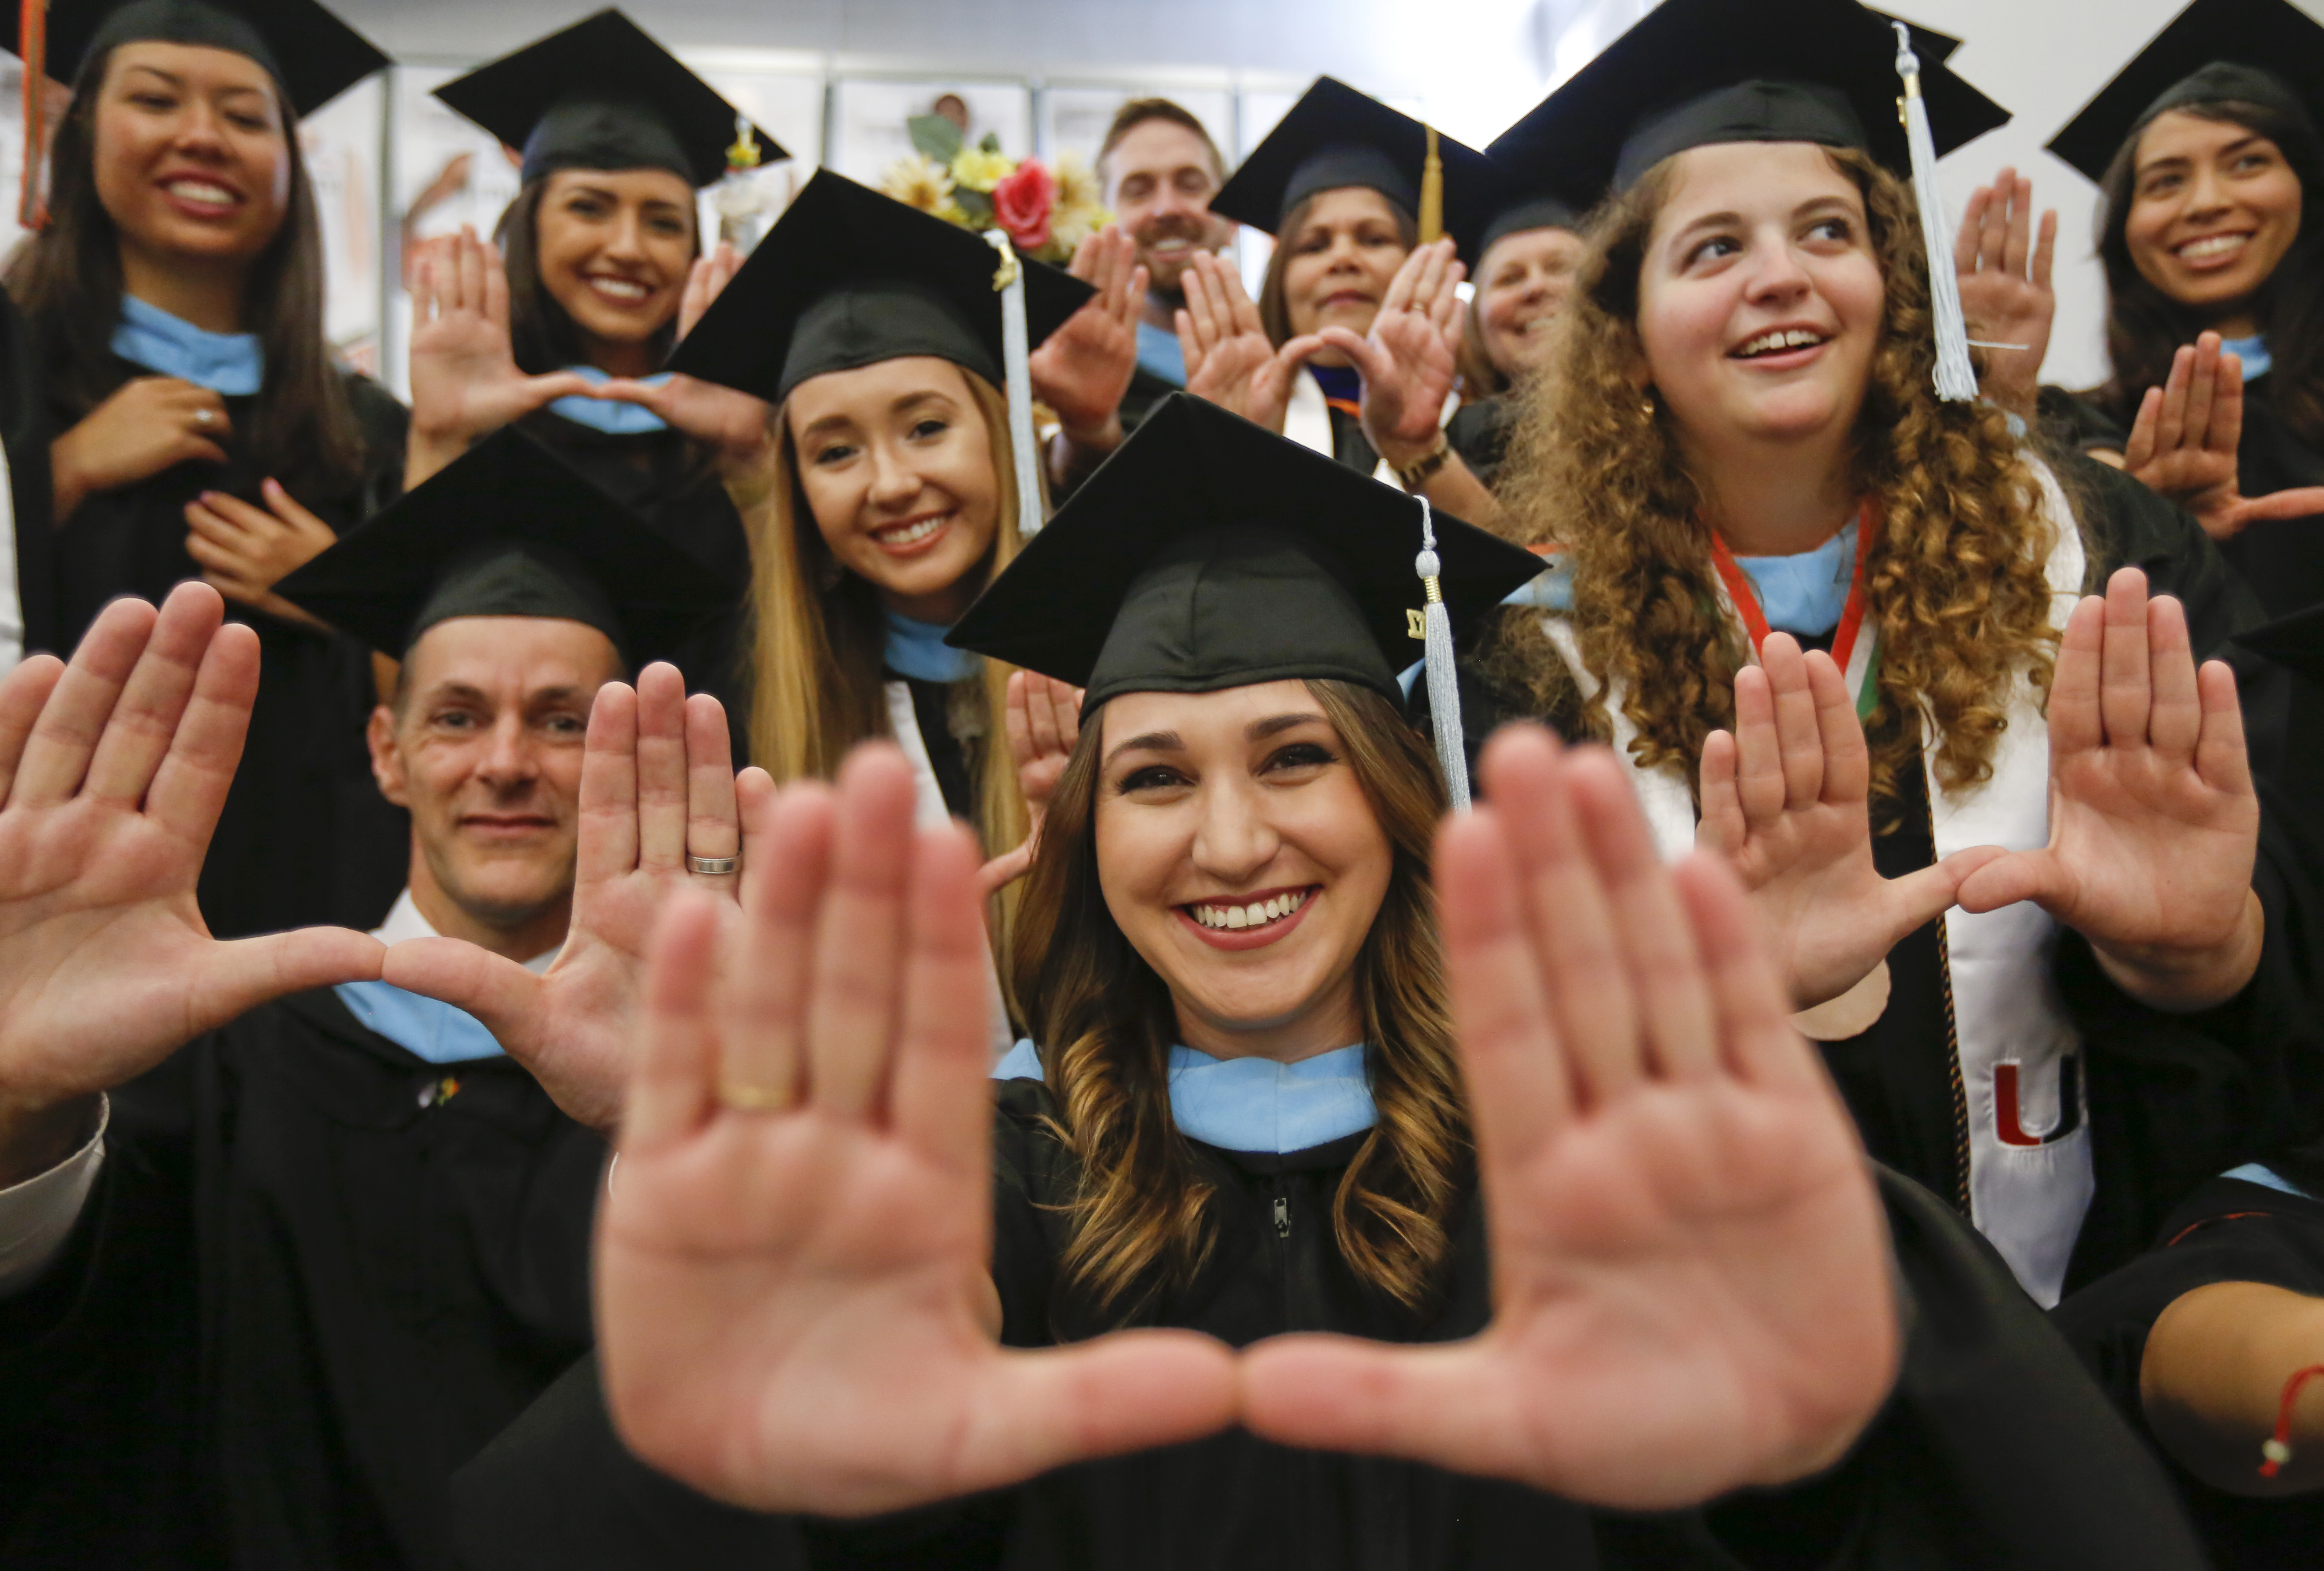 Recent graduates in ceremonial attire and mortarboards hold up the U sign with their hands.